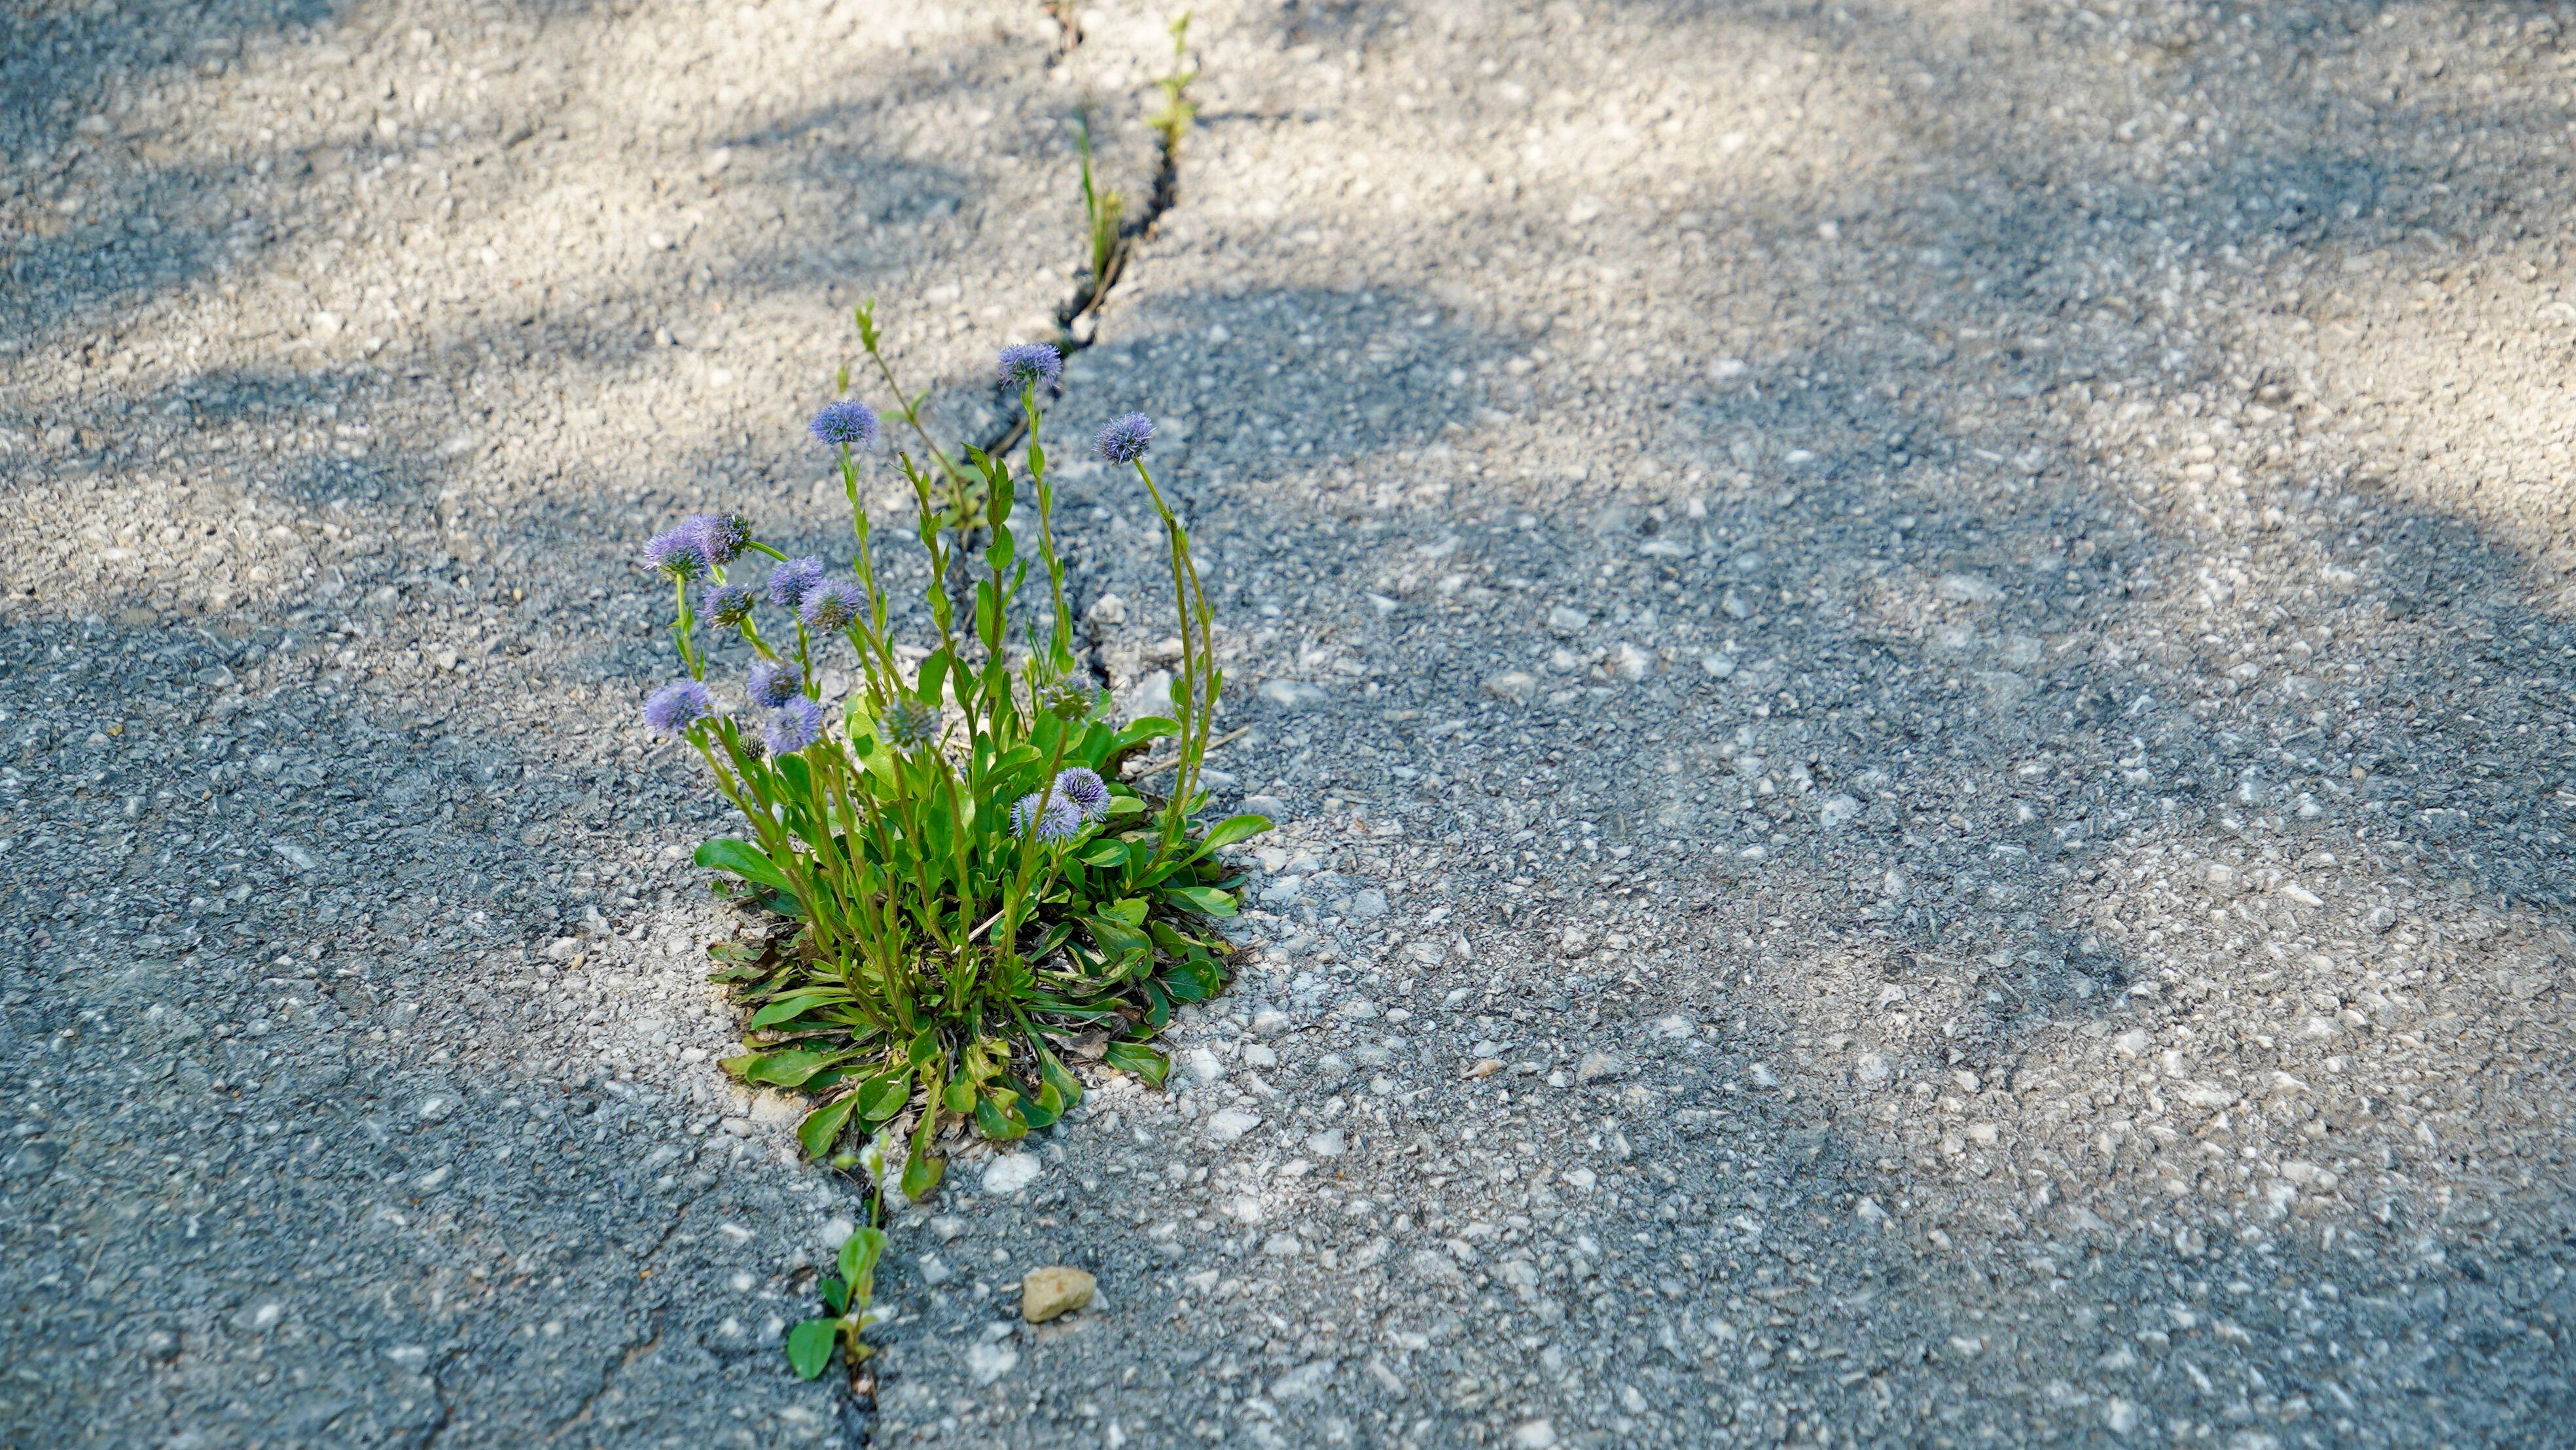 Flowers growing from a crack in a pavement 